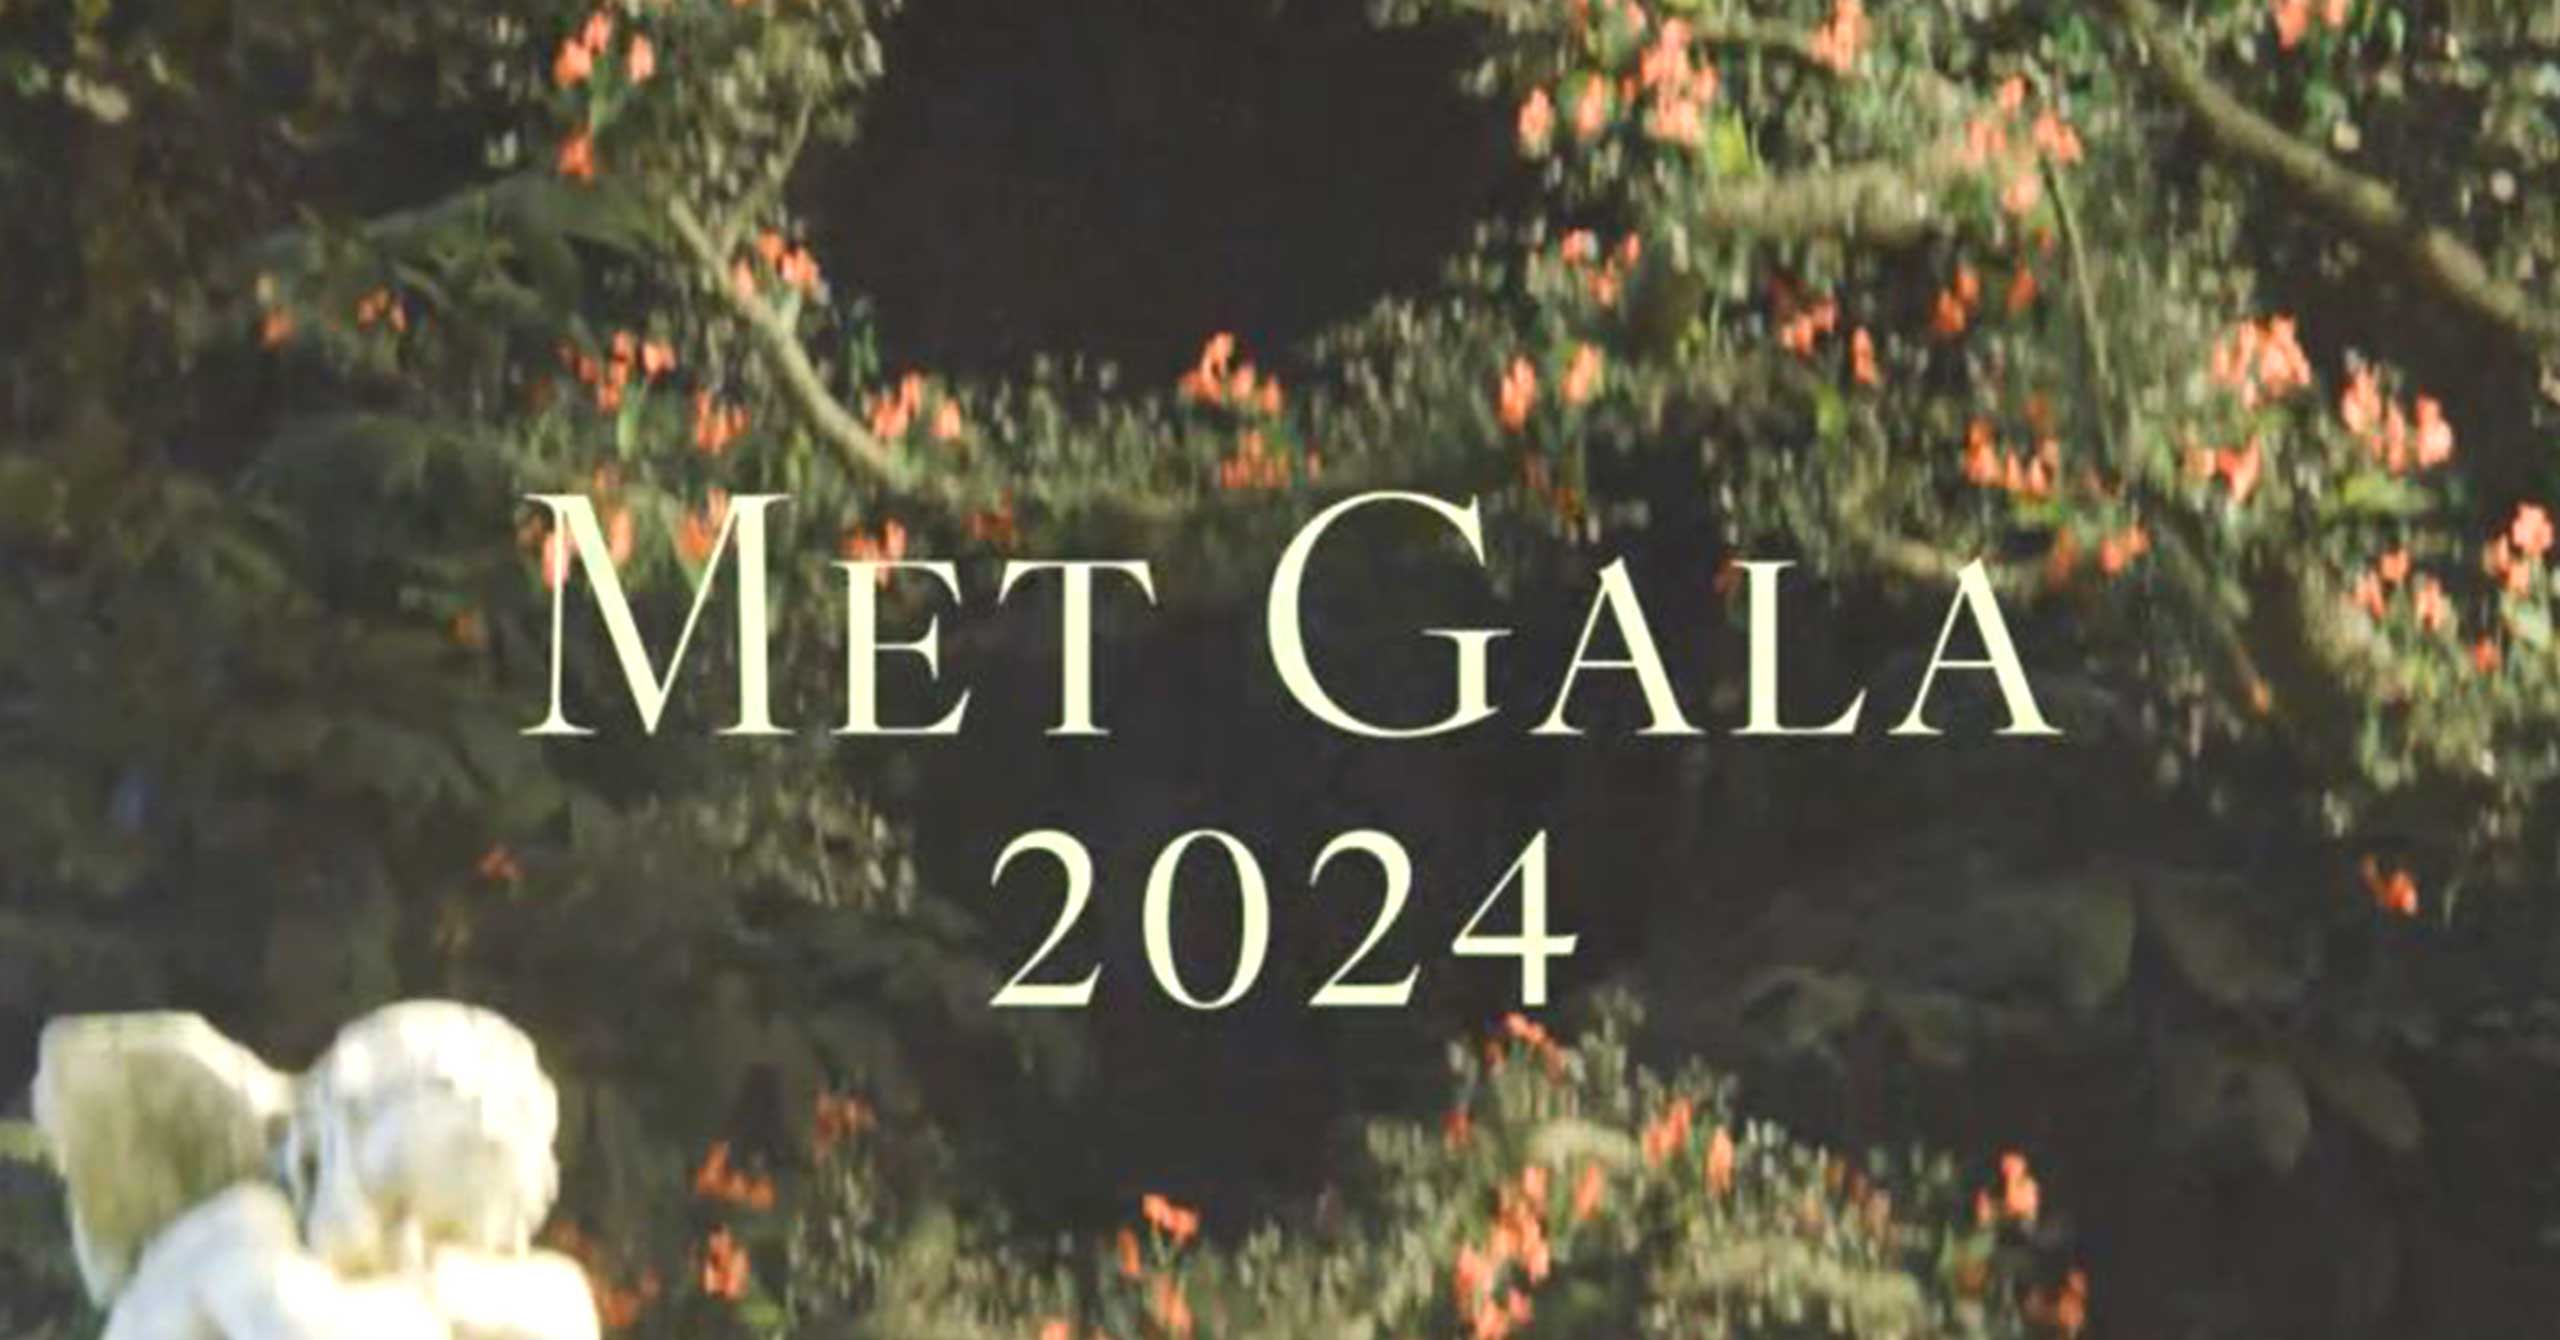 How You Can Watch The 2024 Met Gala Livestream